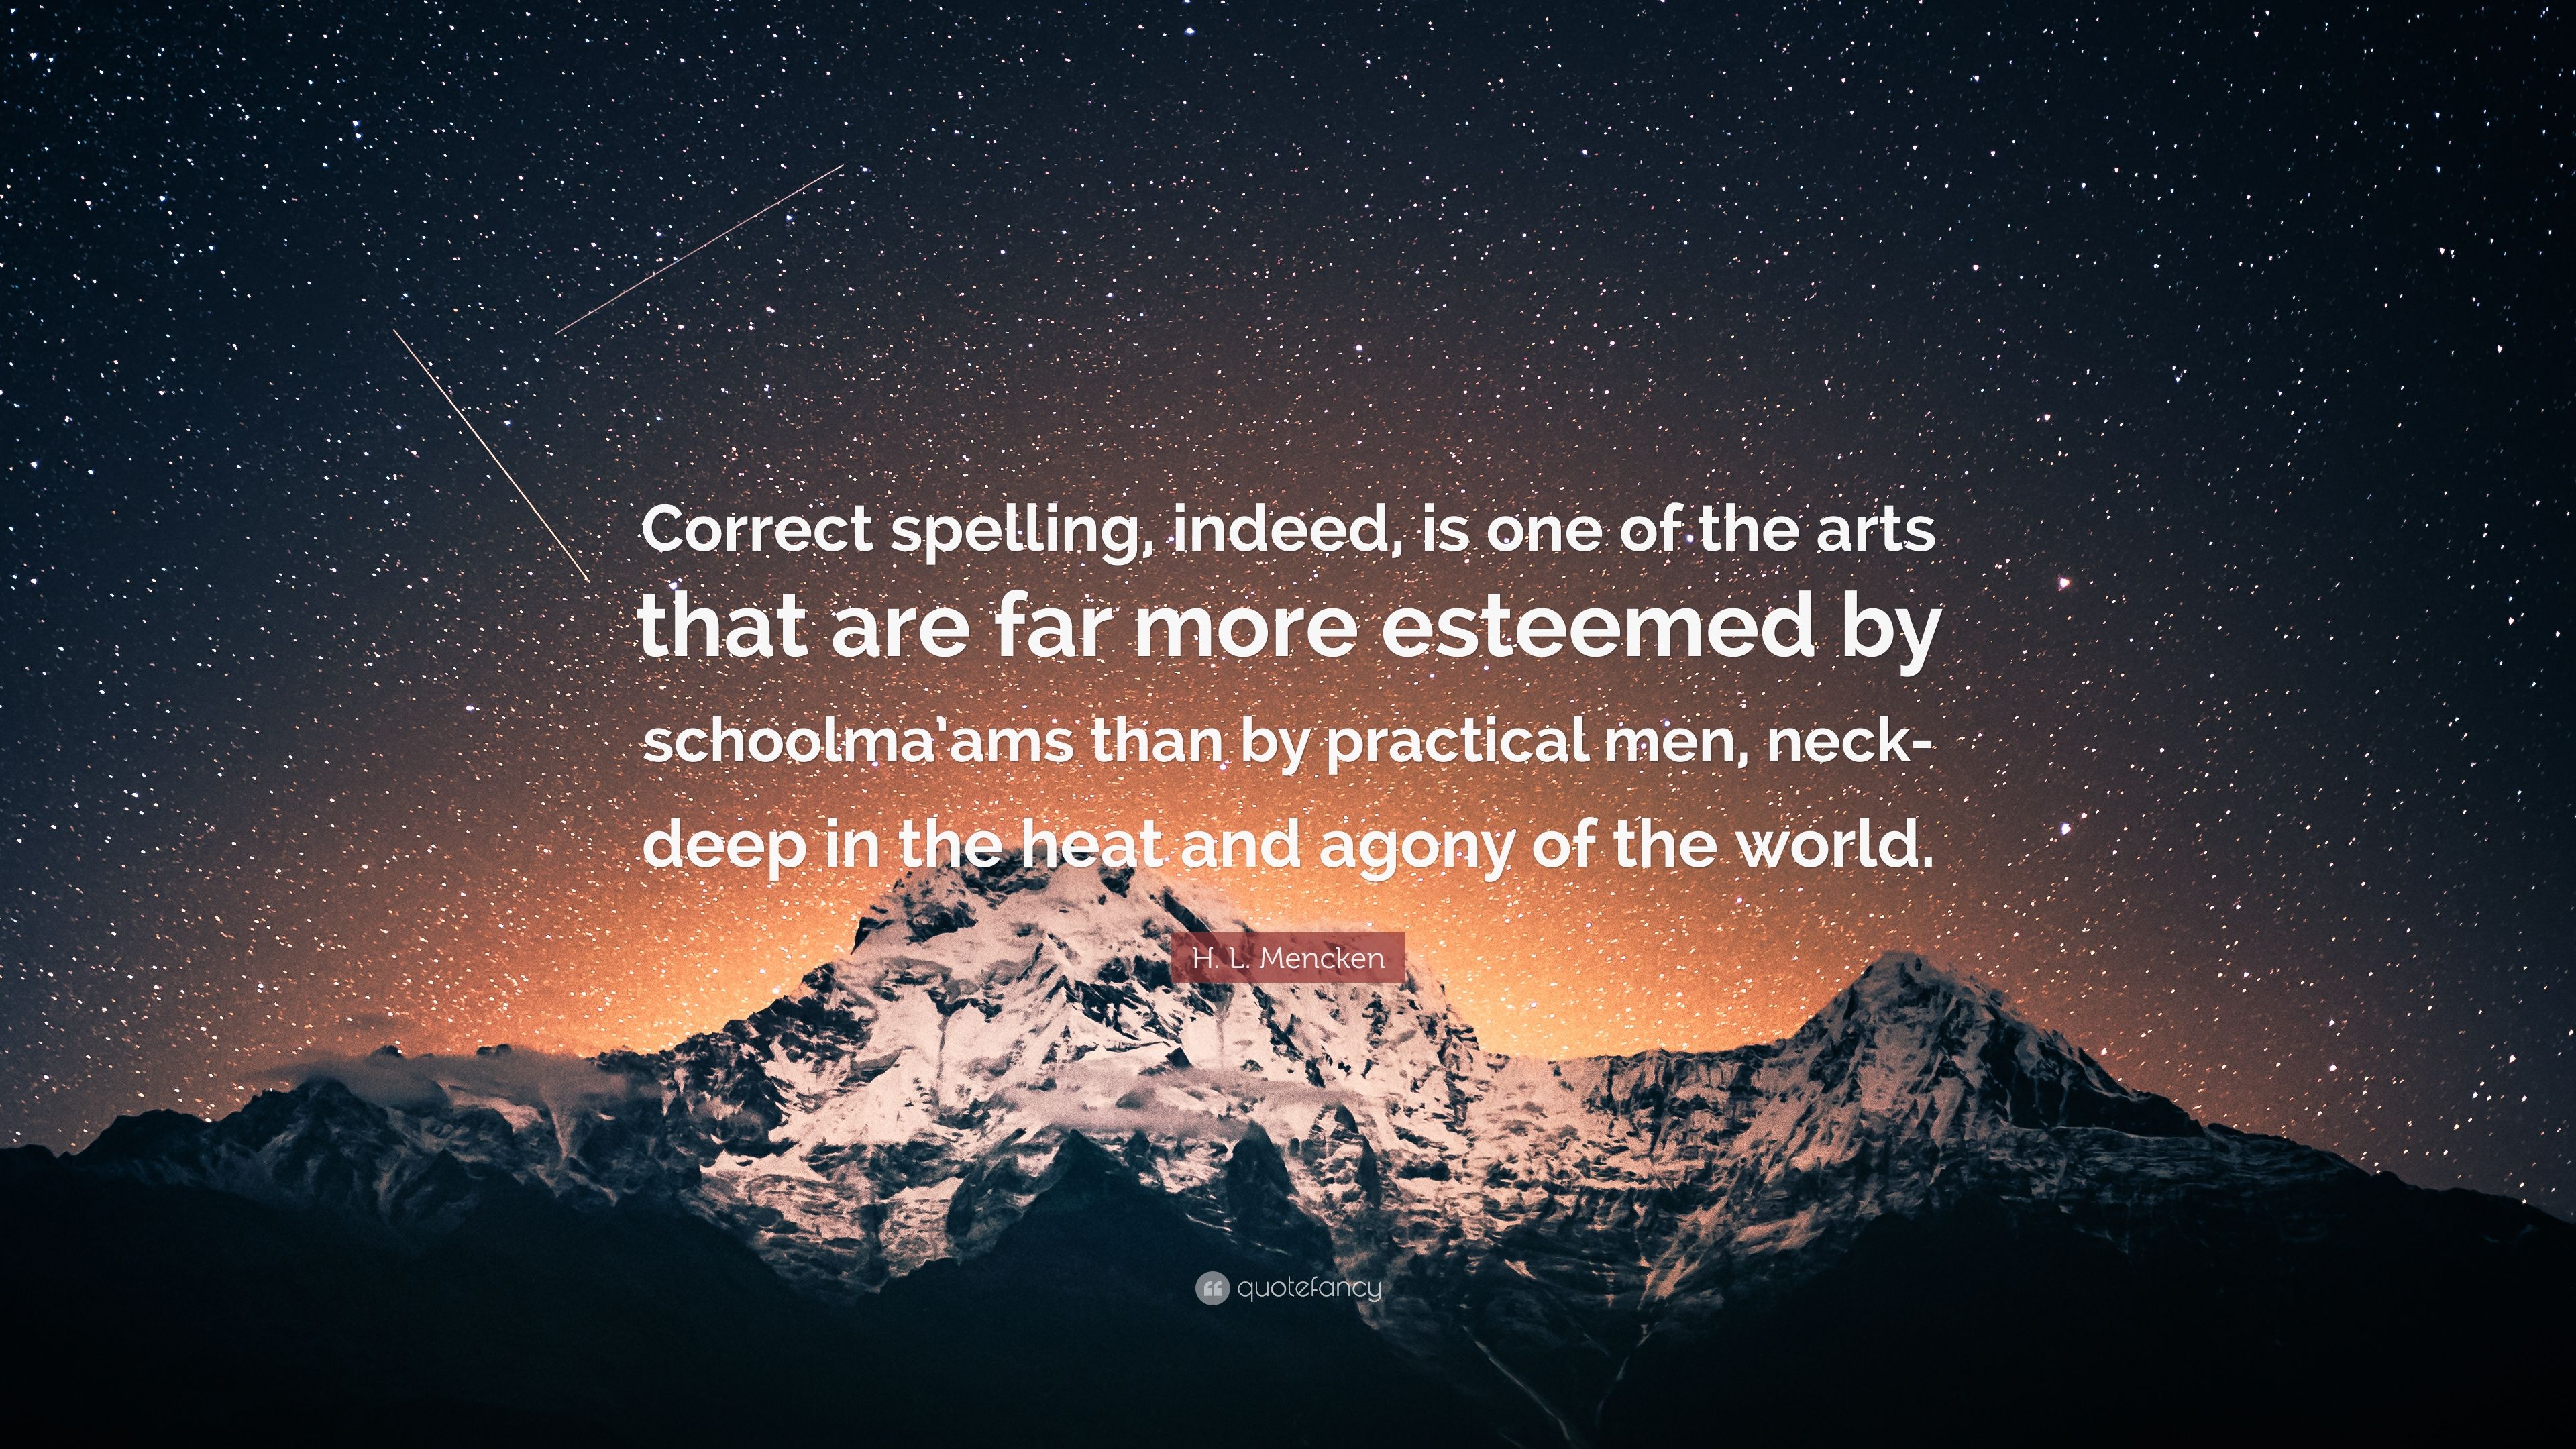 H. L. Mencken Quote: “Correct spelling, indeed, is one of the arts